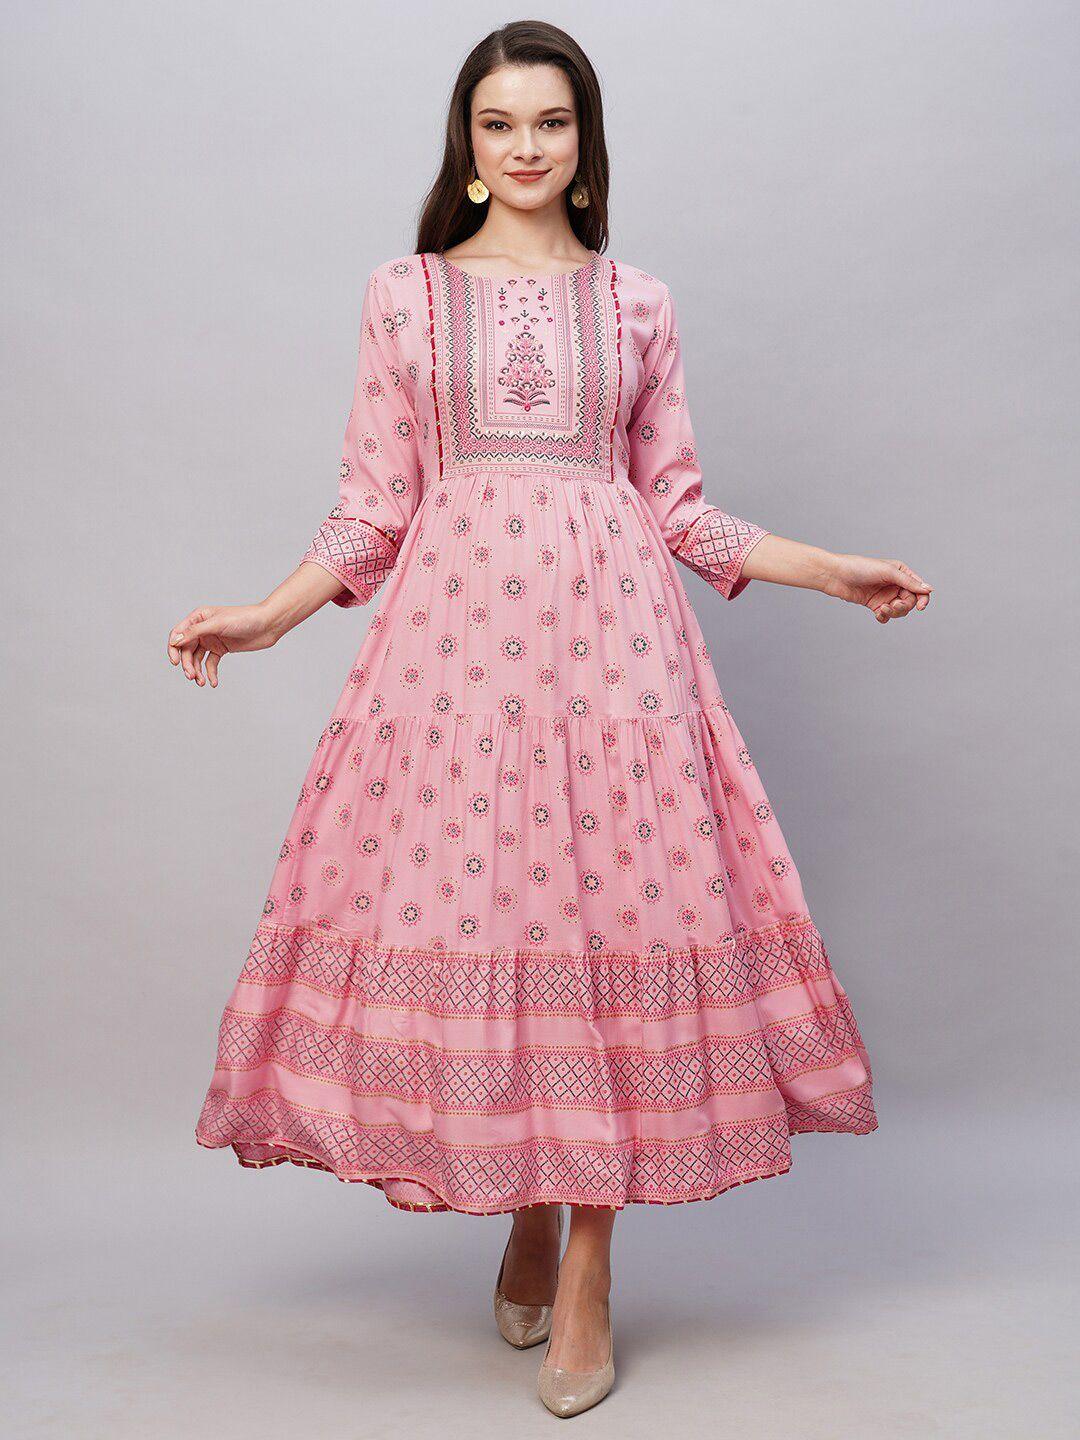 kiana pink ethnic motifs printed round neck embroidered detailed maxi dress